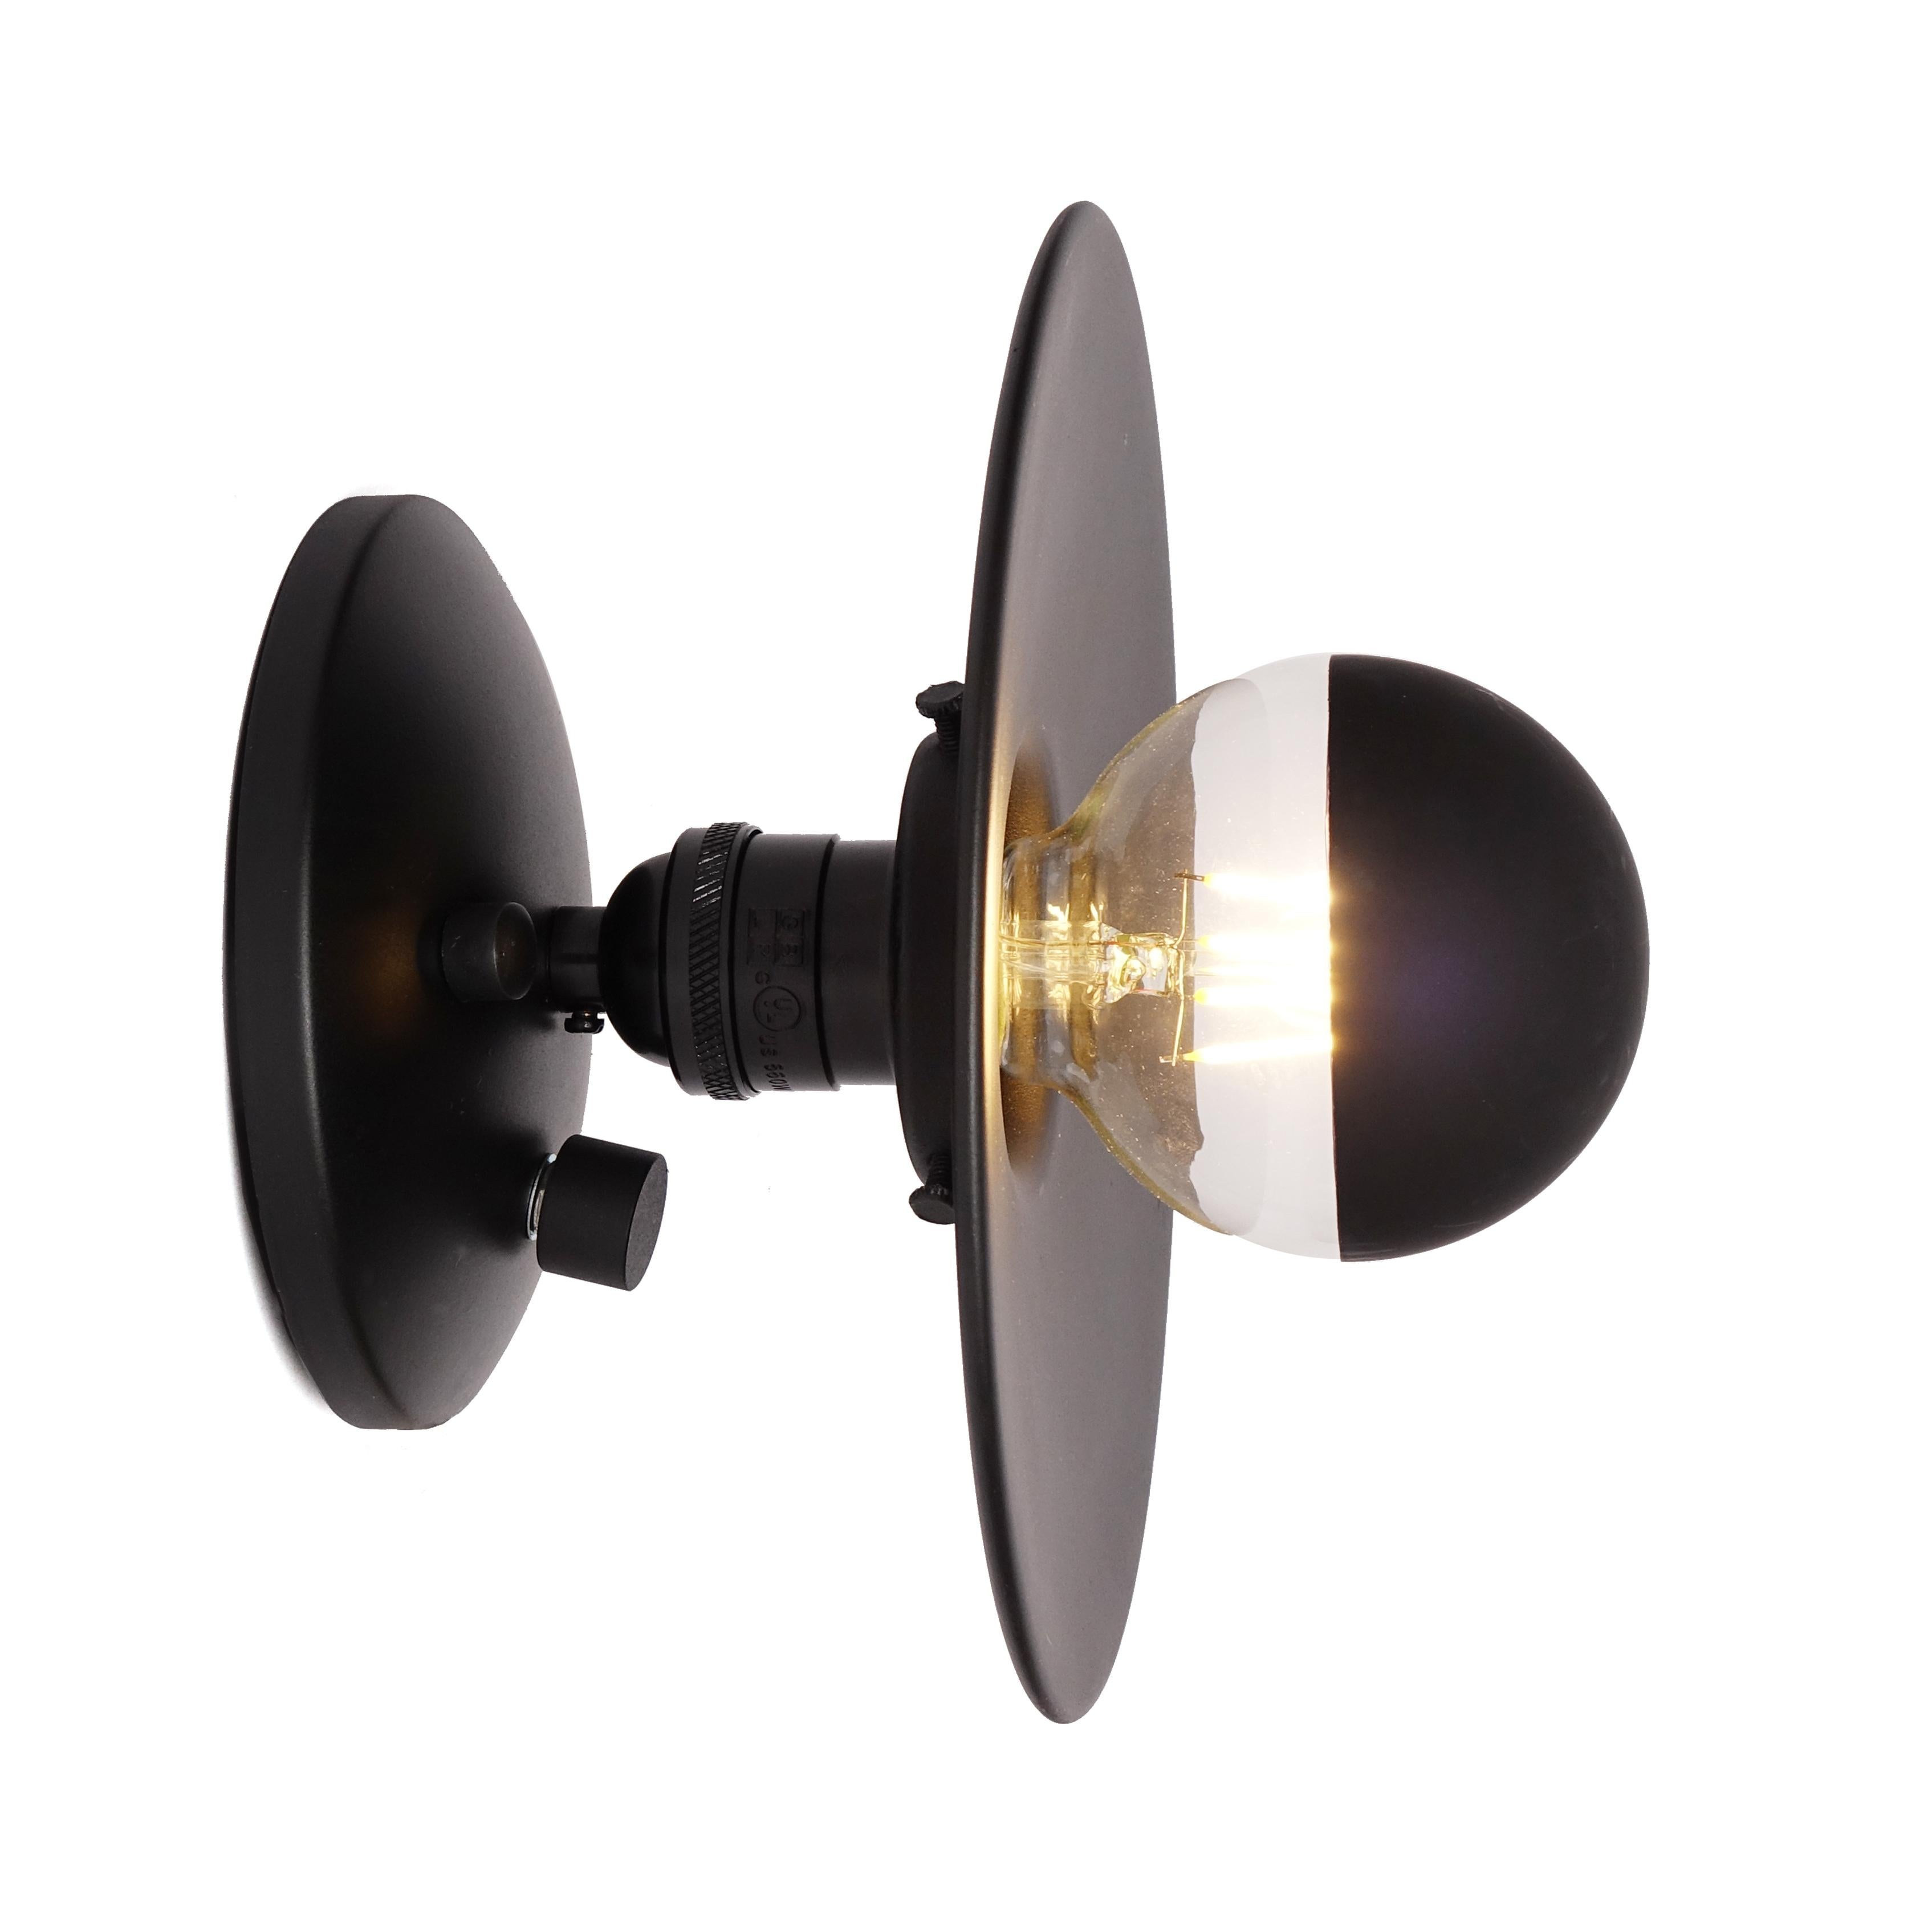 A simple modern sconce to accent your bedroom, bathroom, or work space. This contemporary light also works well in a commercial setting restaurant, retail, or office space. 
Designed by Michele Varian
Matte black metal
Overall product dimensions: